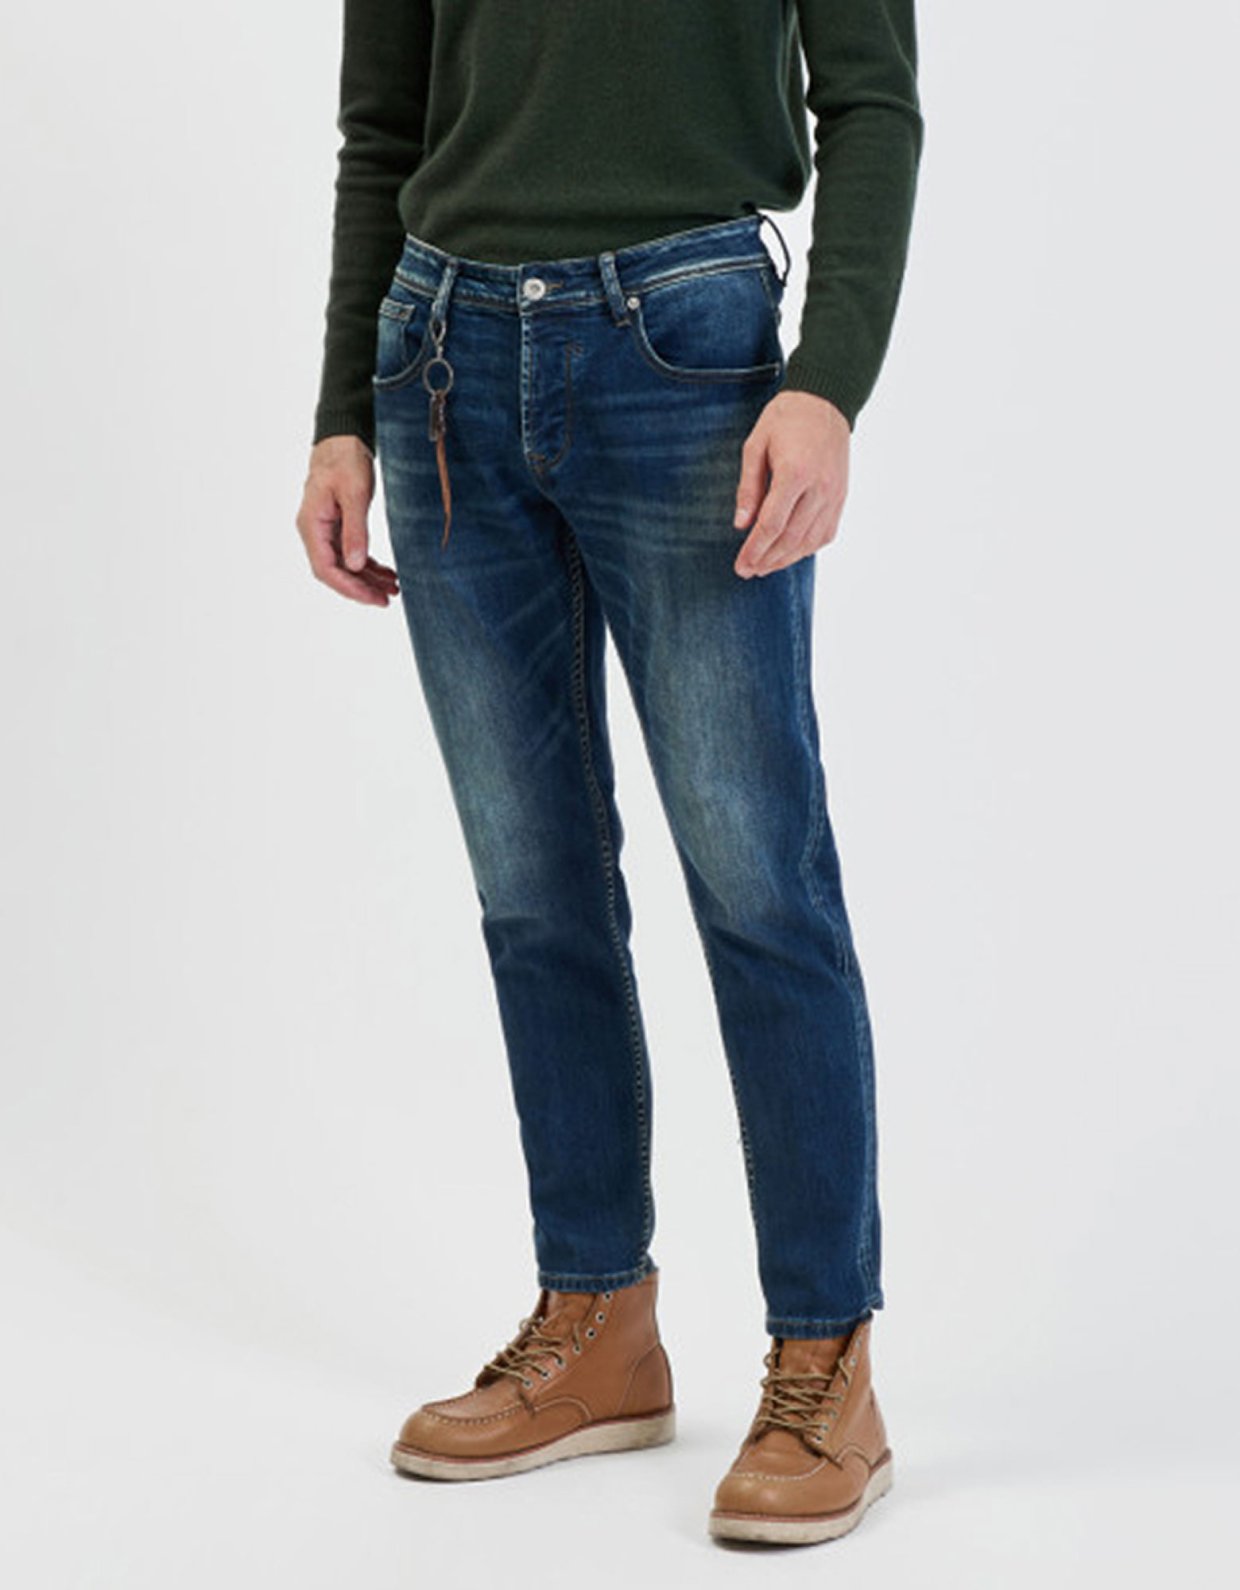 Gianni Lupo Kevin chain medium wash jeans